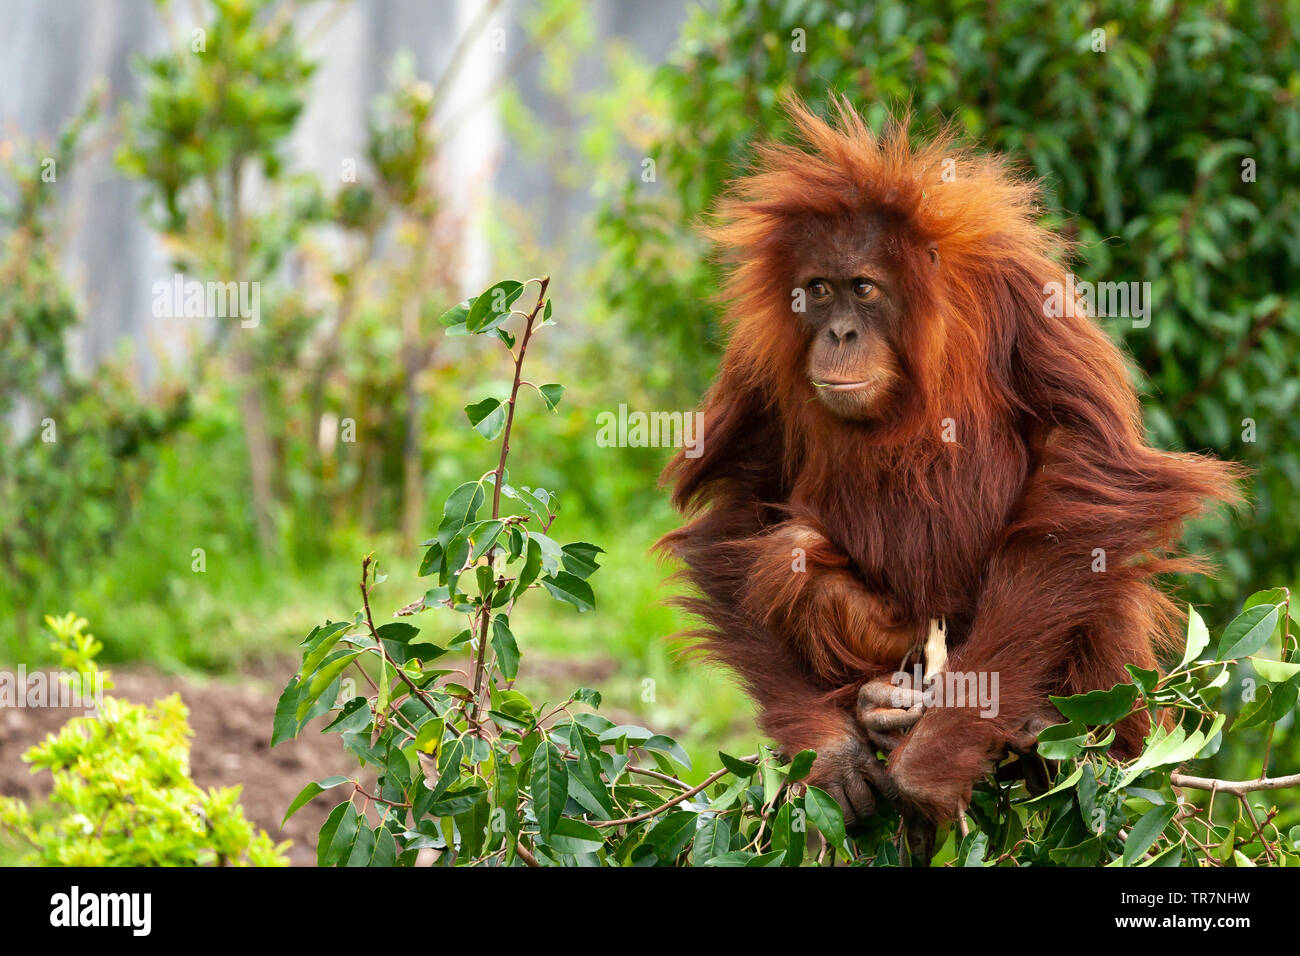 A young Orang-Utan (Pongo abelii) perched atop a shrub and chewing a leaf, surrounded by green foliage. Shot at Chester Zoo, England, United Kingdom. Stock Photo